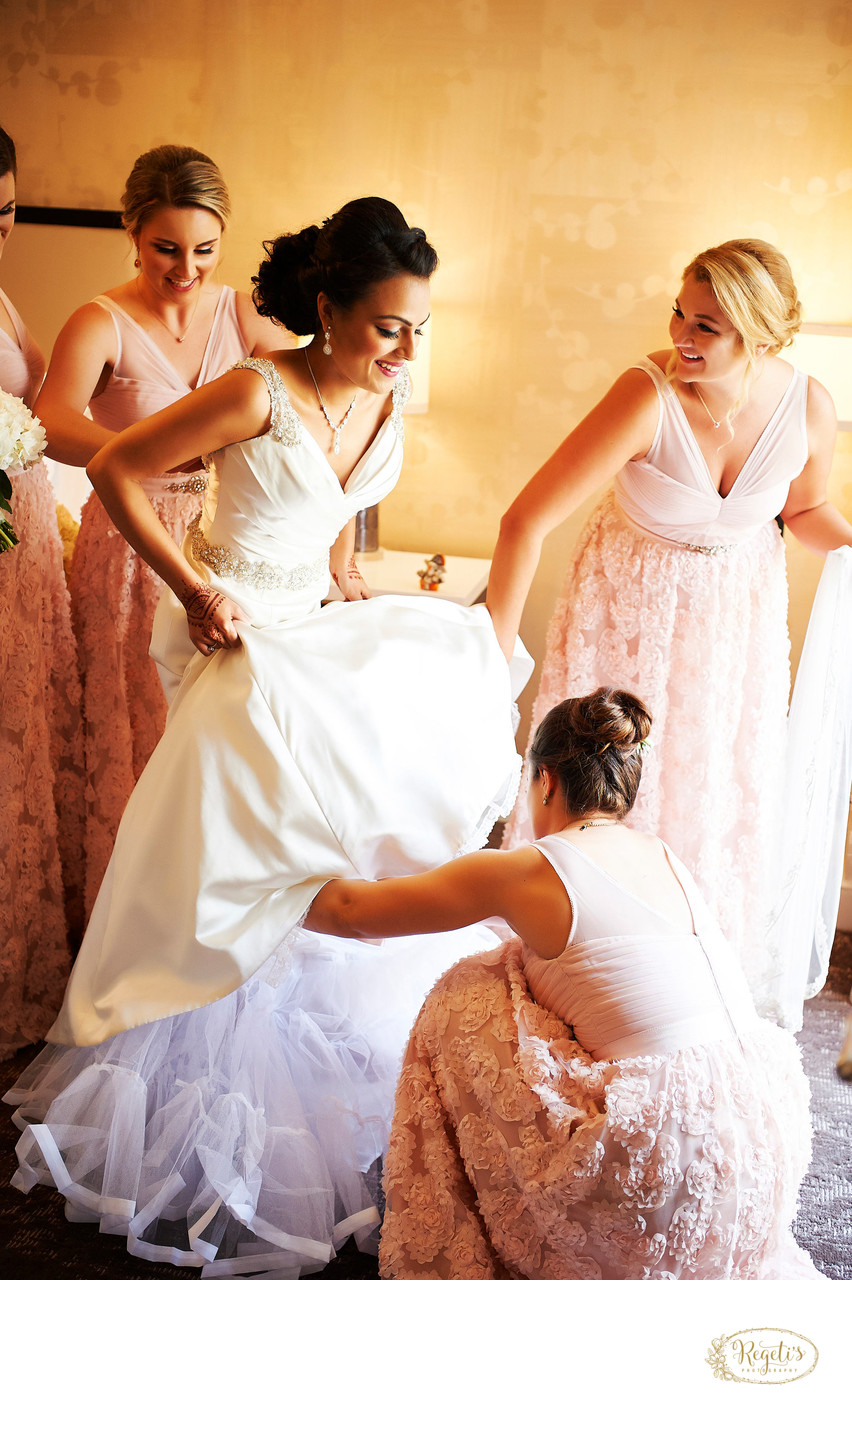 Bridesmaids Helping the Bride to Get Ready